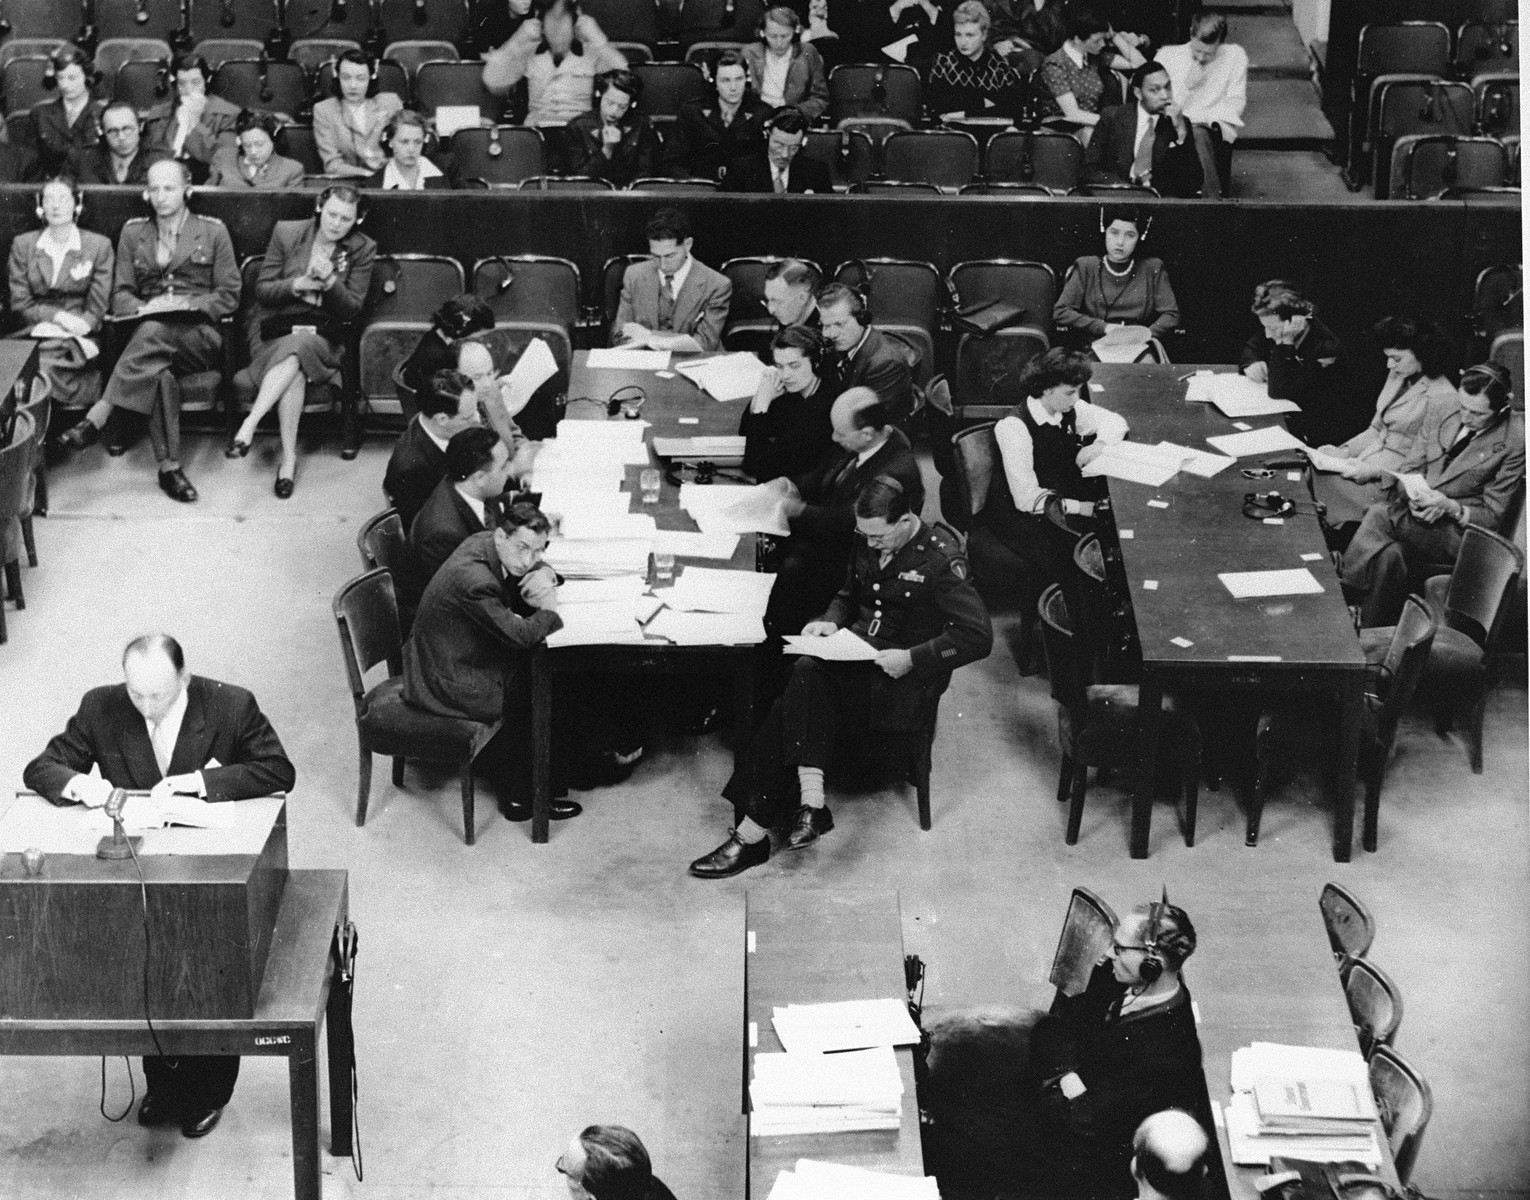 View of the prosecution table at the Medical Case (Doctors') Trial in Nuremberg.